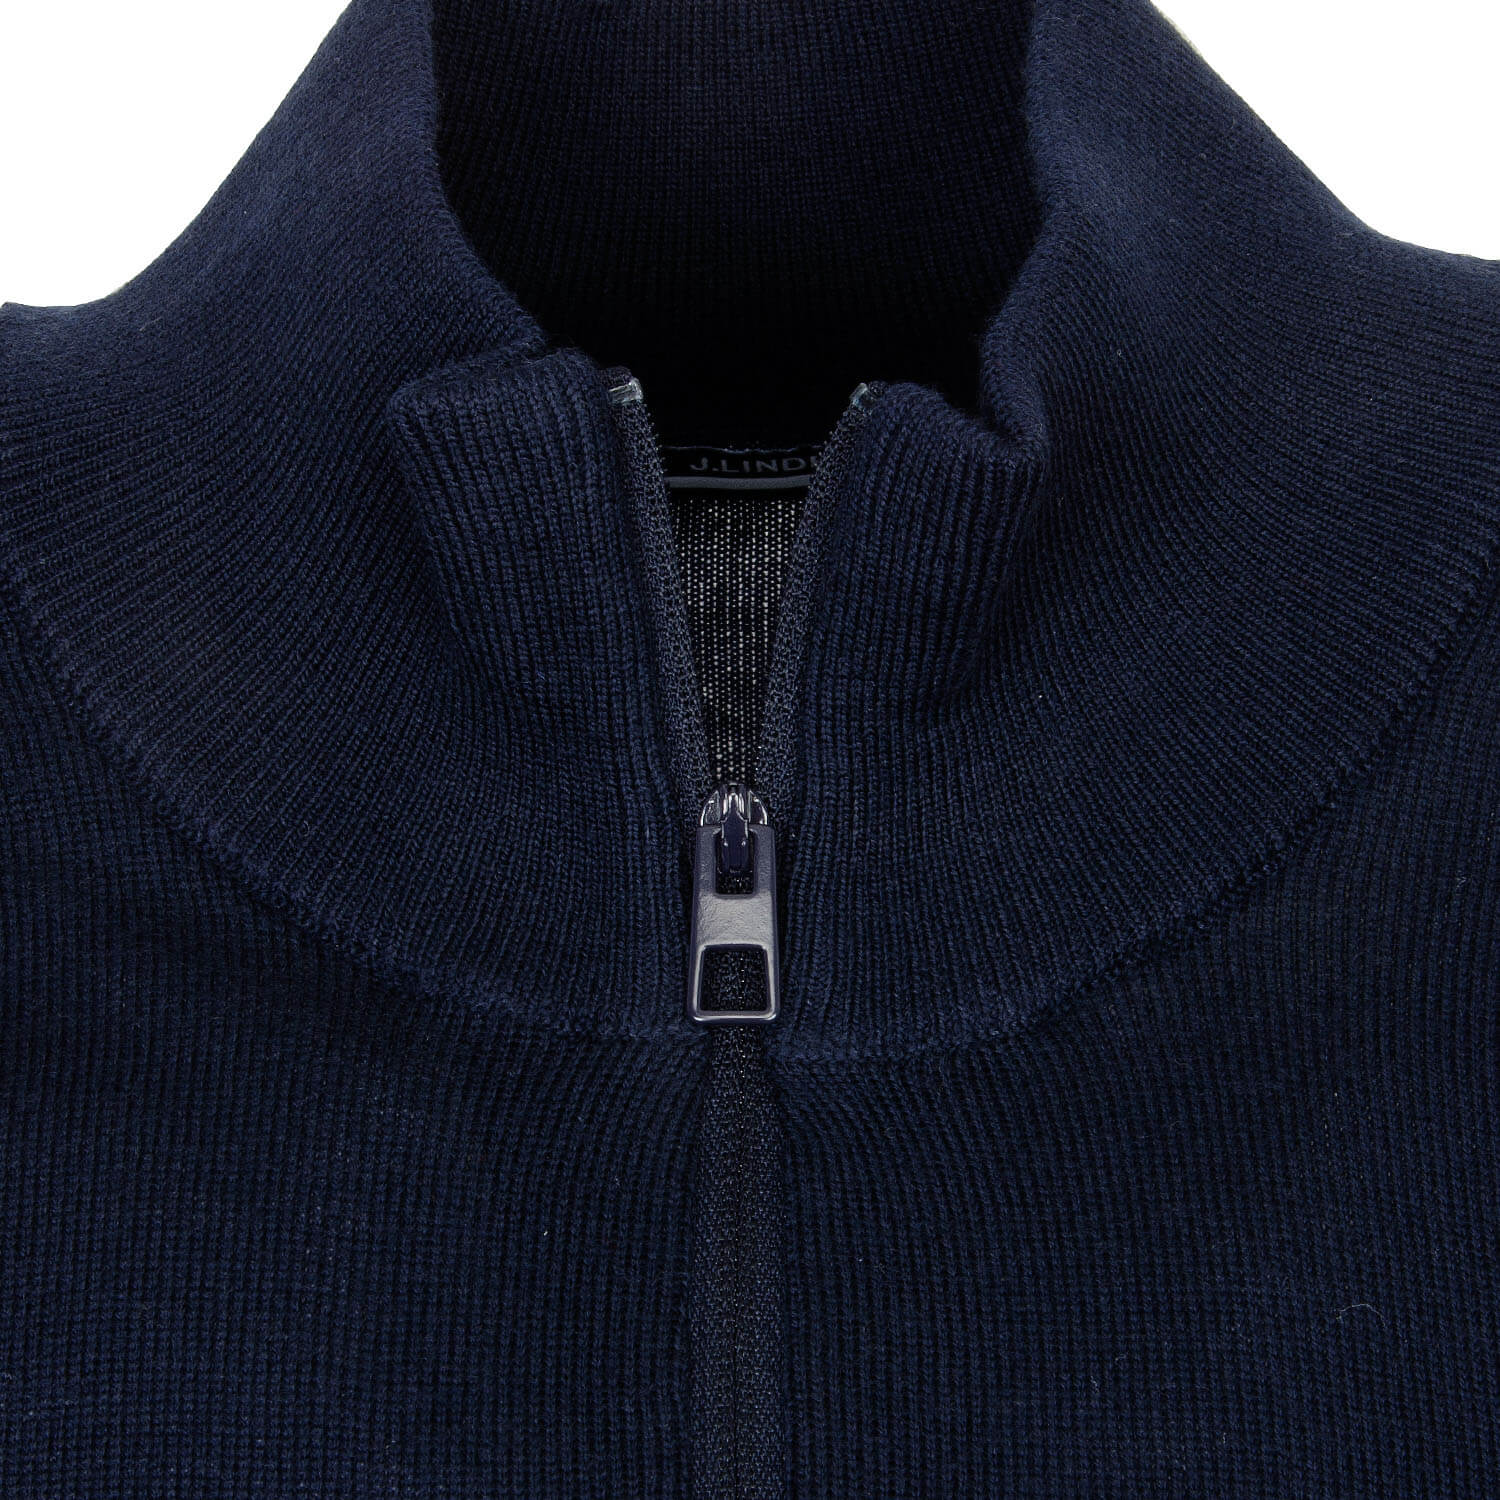 J Lindeberg Andreas Knitted Golf Sweater JL Navy | Scottsdale Golf